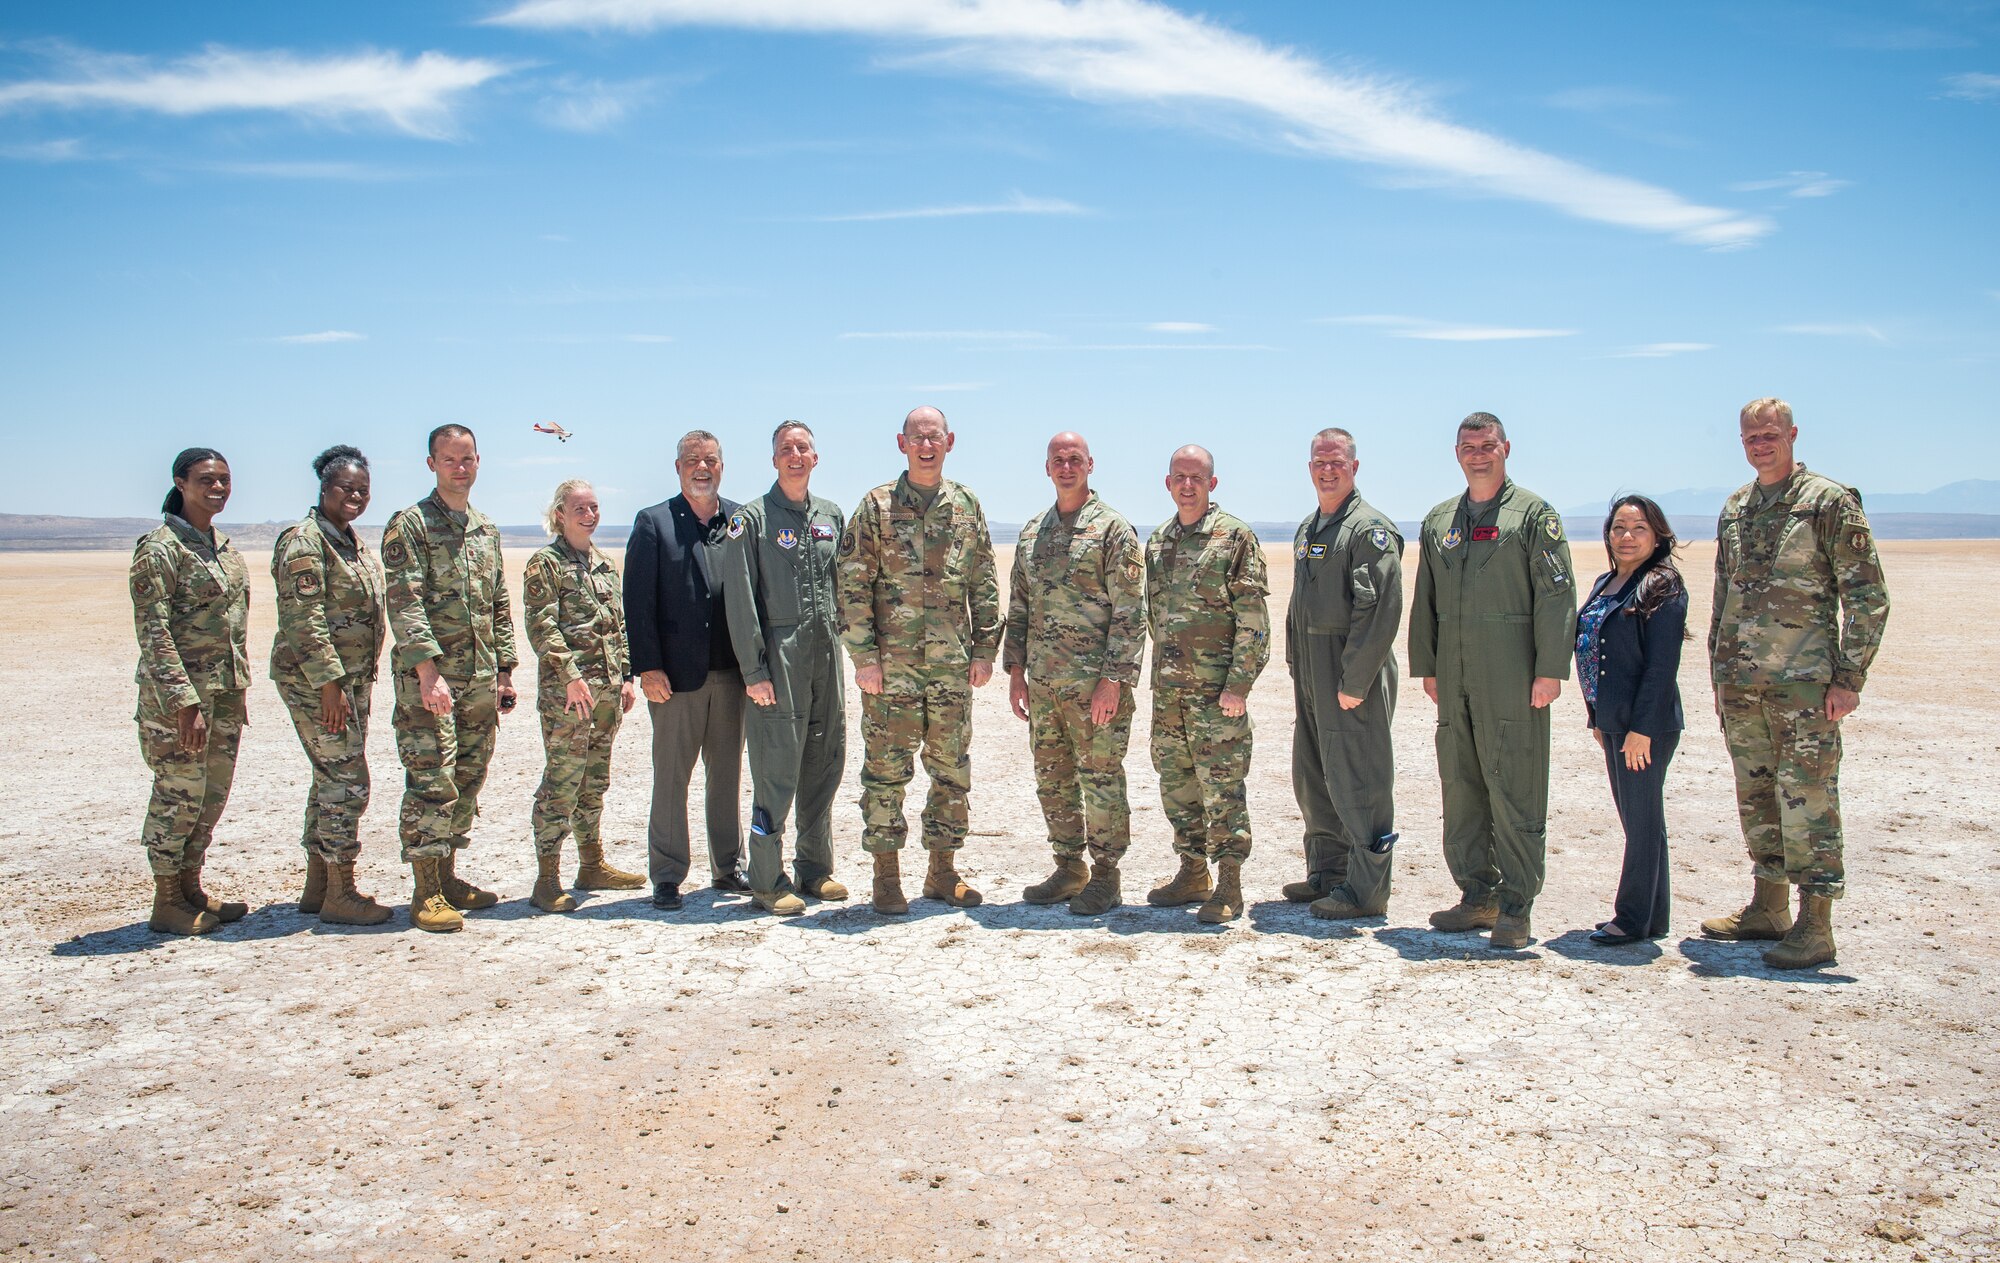 412th Test Wing leadership pose for a group photo with Gen. Duke Z. Richardson, Air Force Materiel Command commander, while a sUAS (small Unmanned Aerial System) flies above Rogers Dry Lake Bed on Edwards Air Force Base, California, July 13. (U.S. Air Force photo by James West)